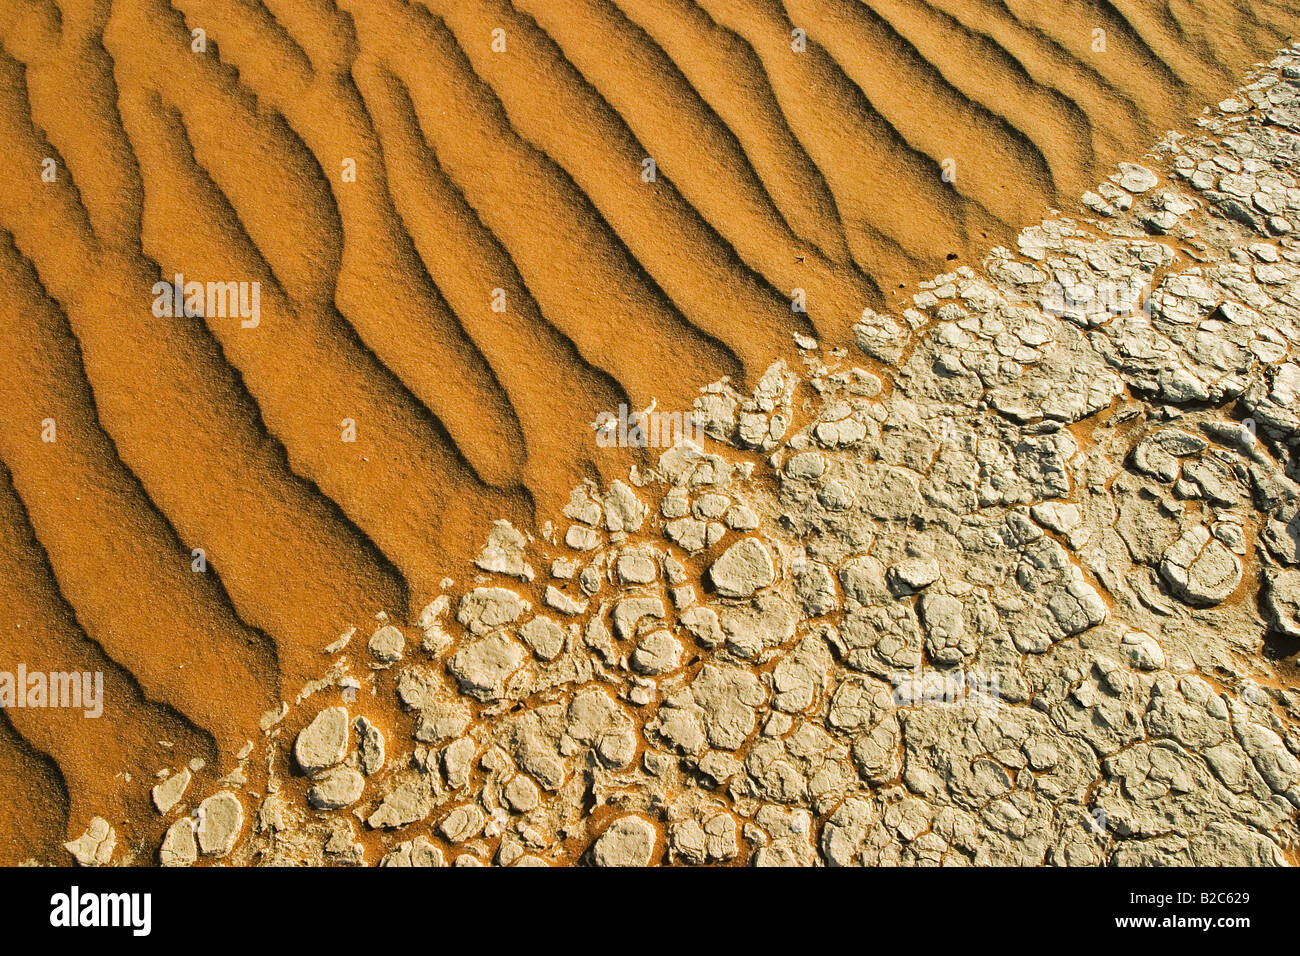 Sand and parched clay soil, Namib Desert, Namibia, Africa Stock Photo